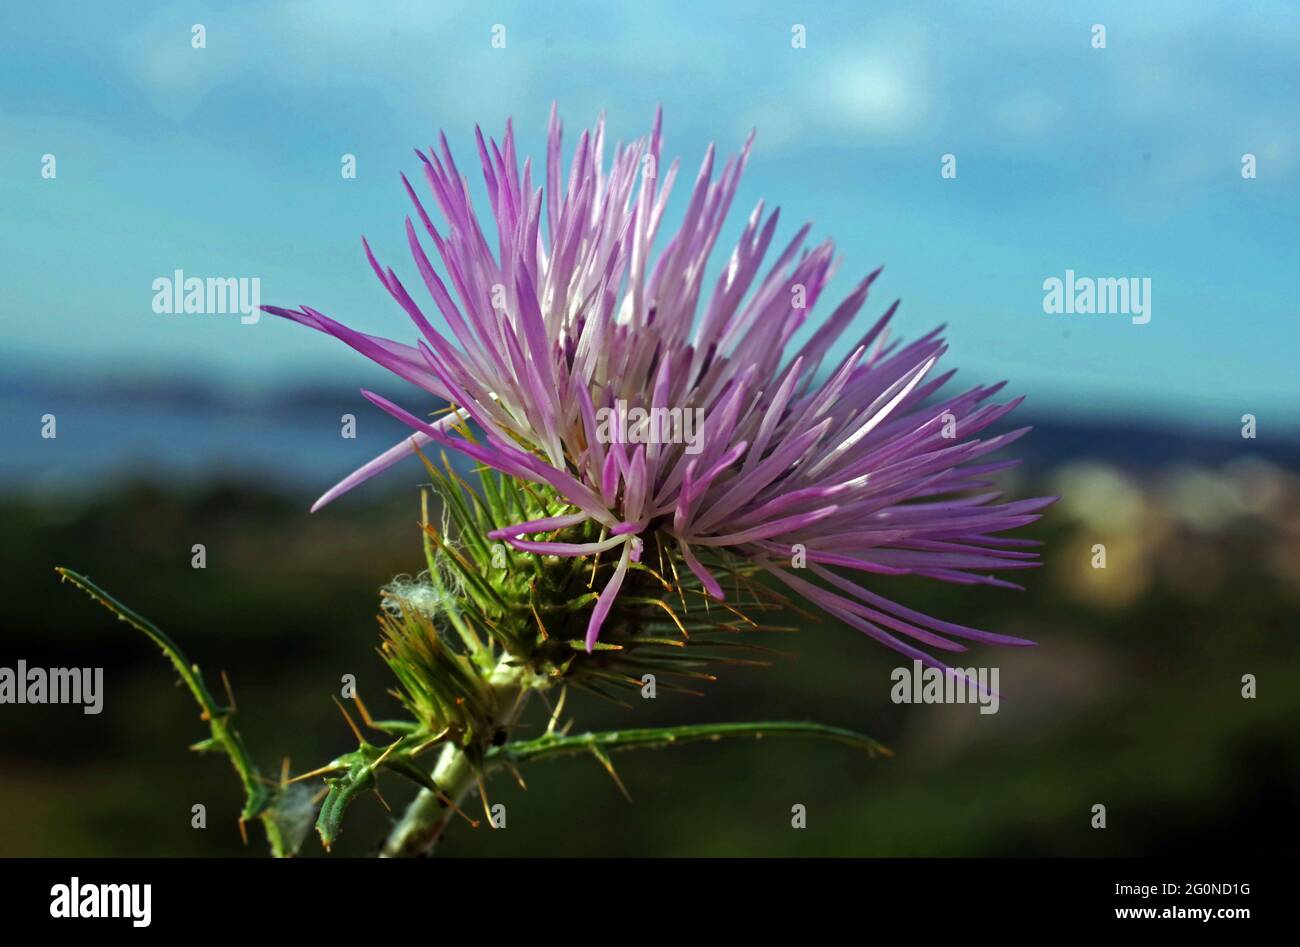 Galactites tomentosa flowering in nature close-up Stock Photo